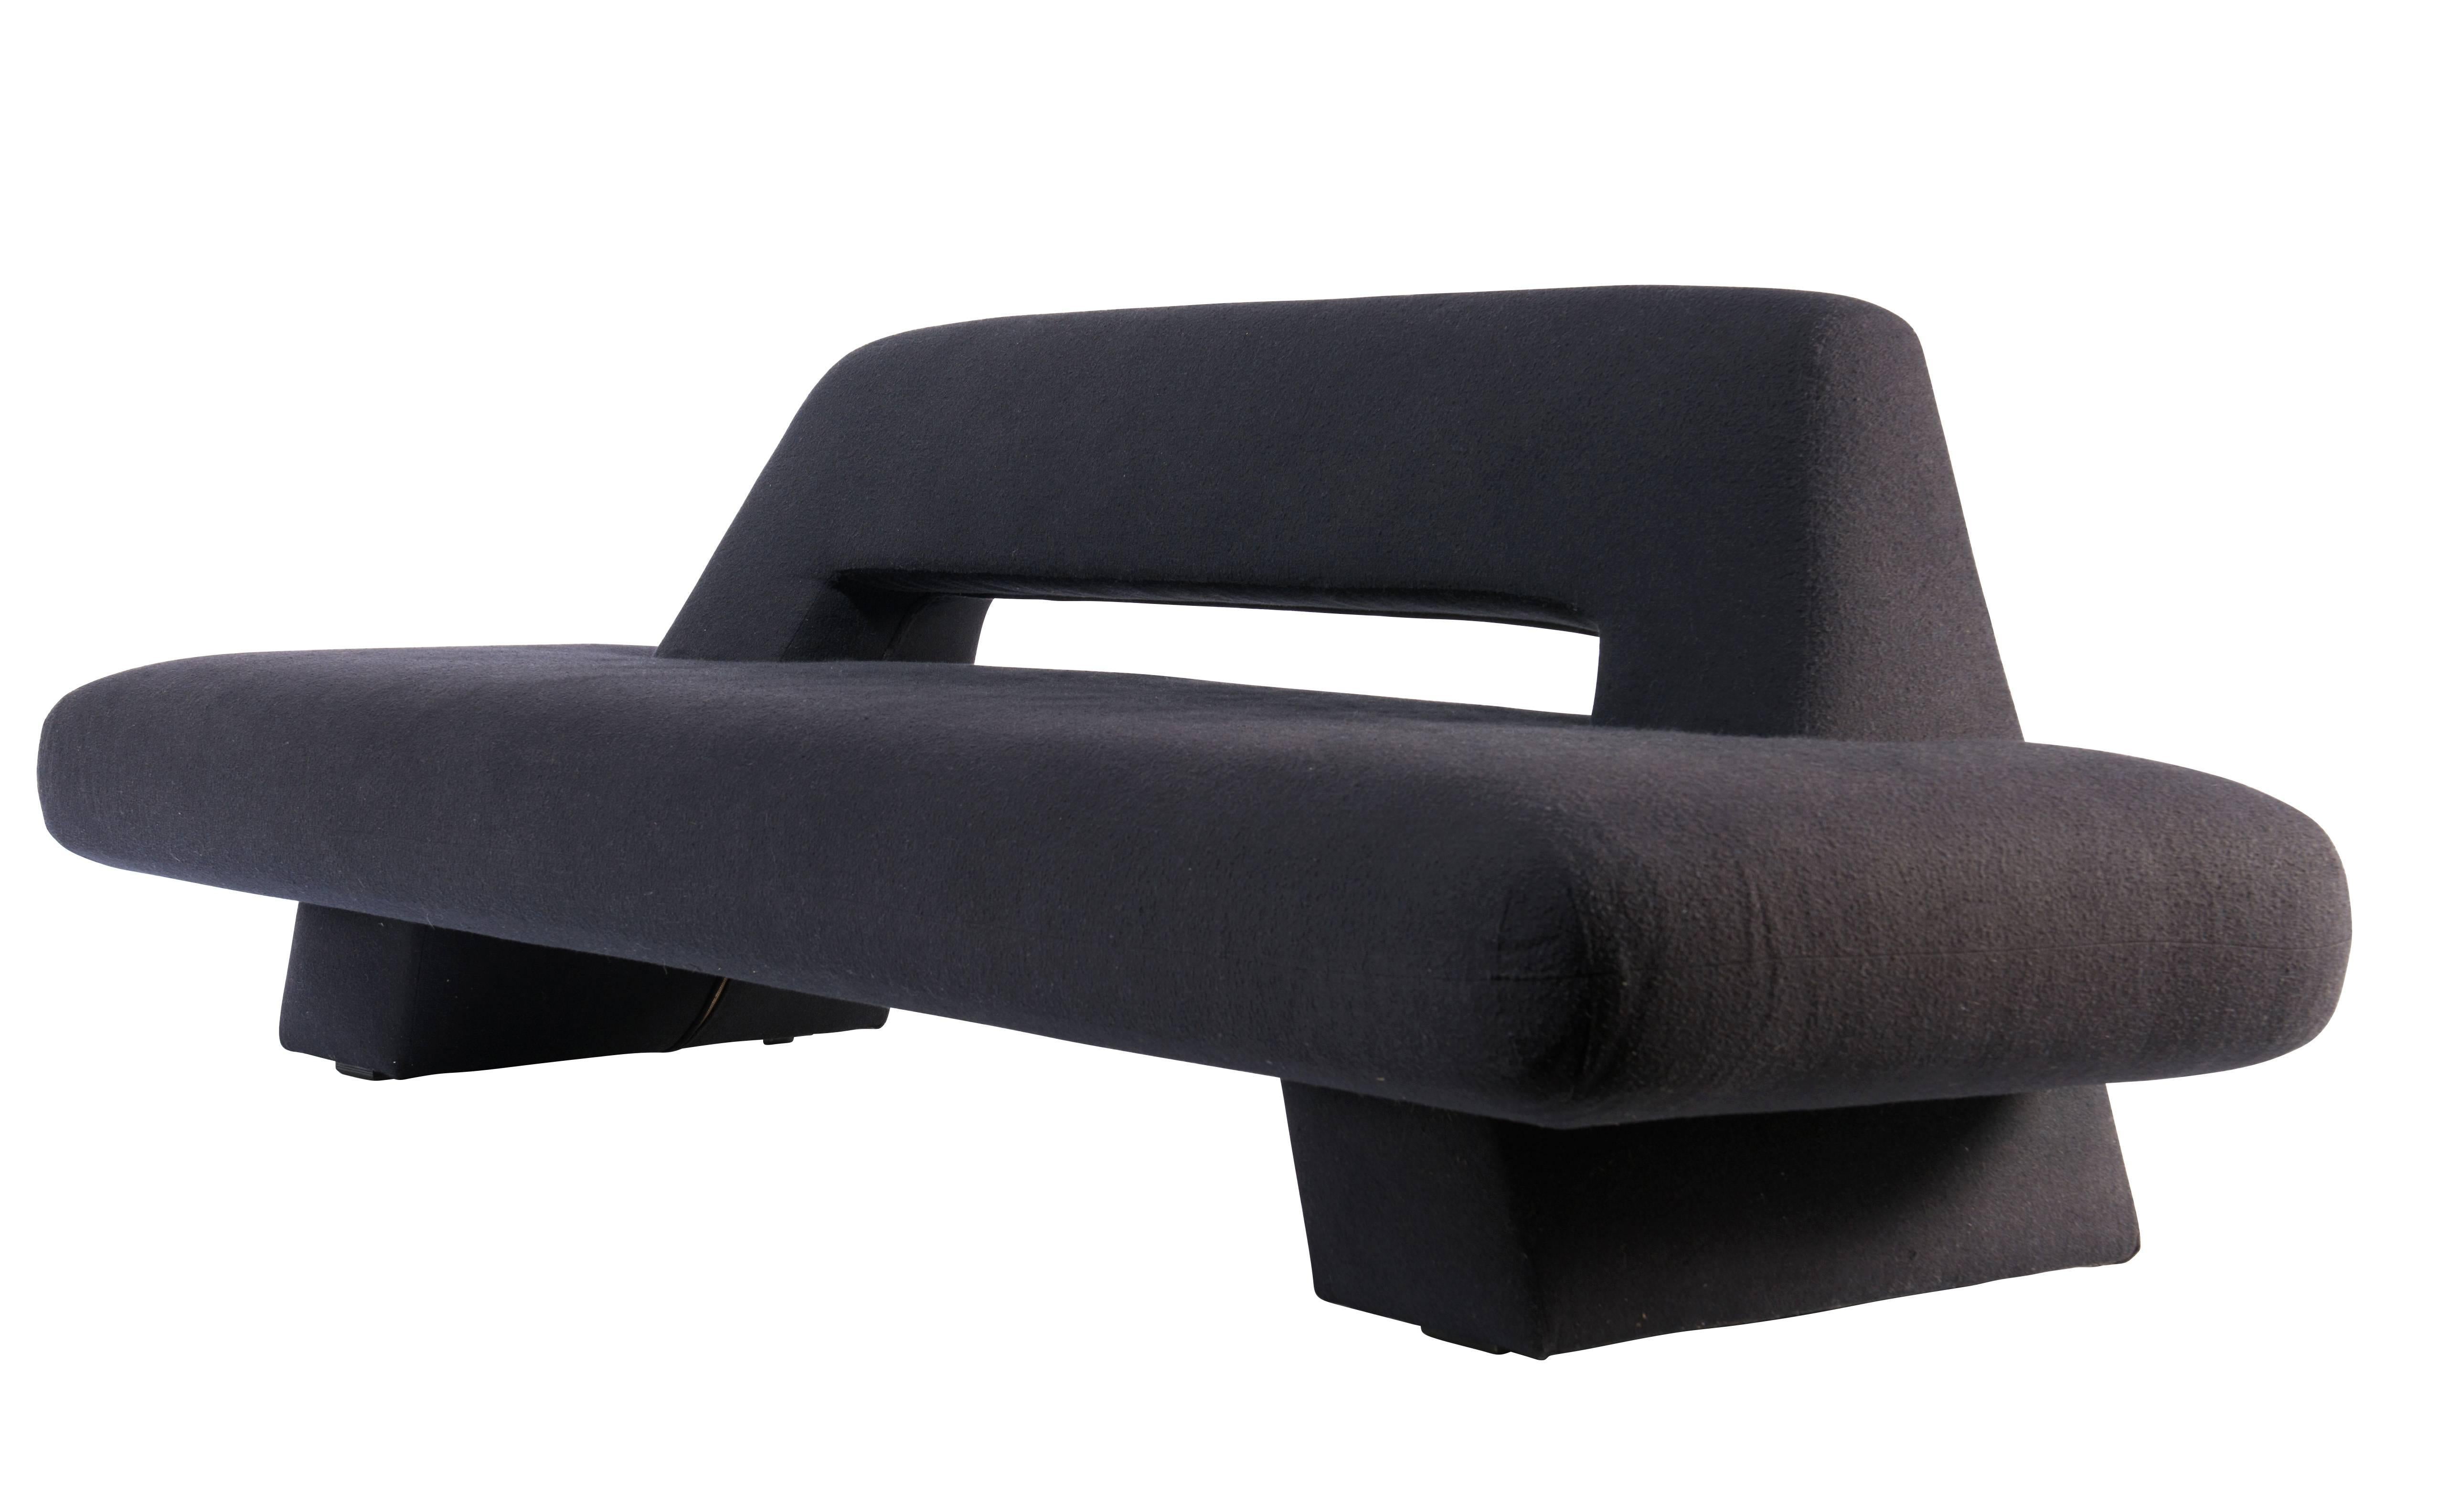 Pair of graphic and architectural sofas by Harvey Probber.